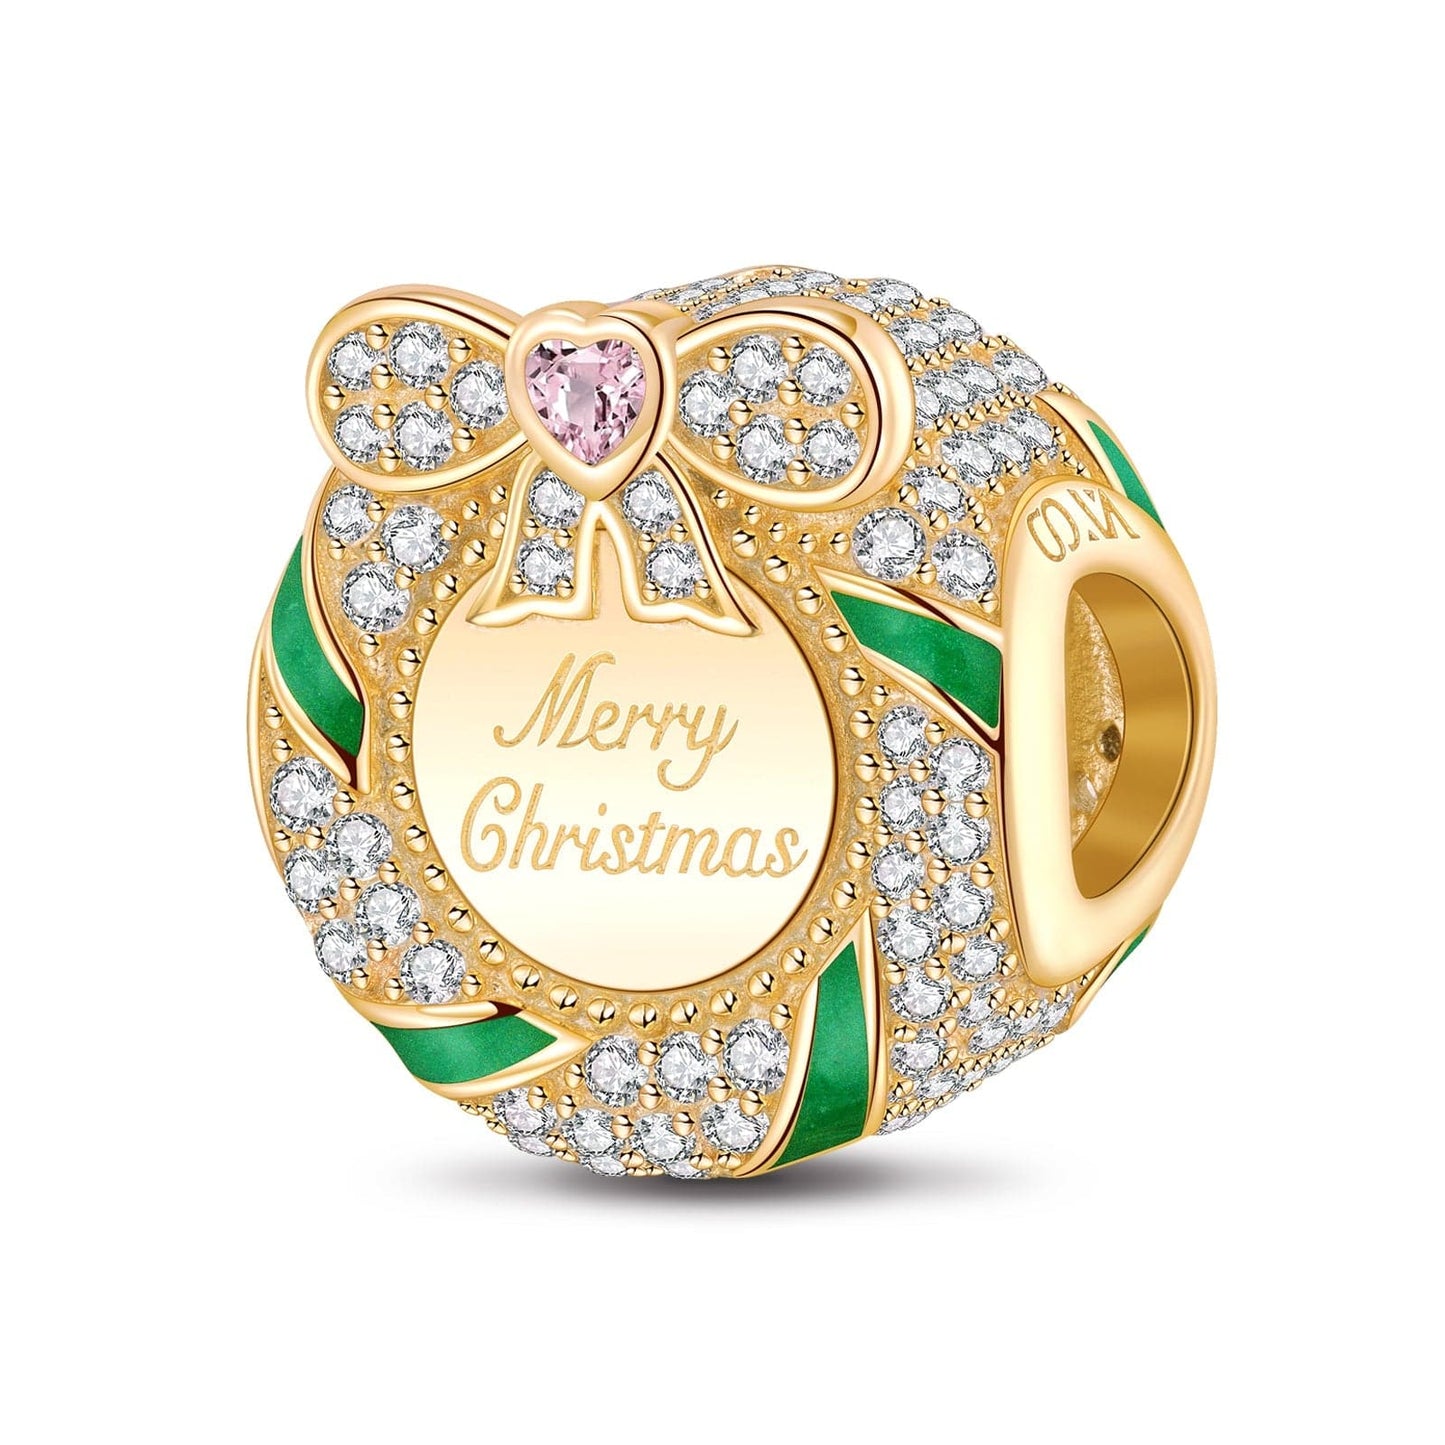 Merry Christmas Wreath Tarnish-resistant Silver Charms With Enamel In 14K Gold Plated